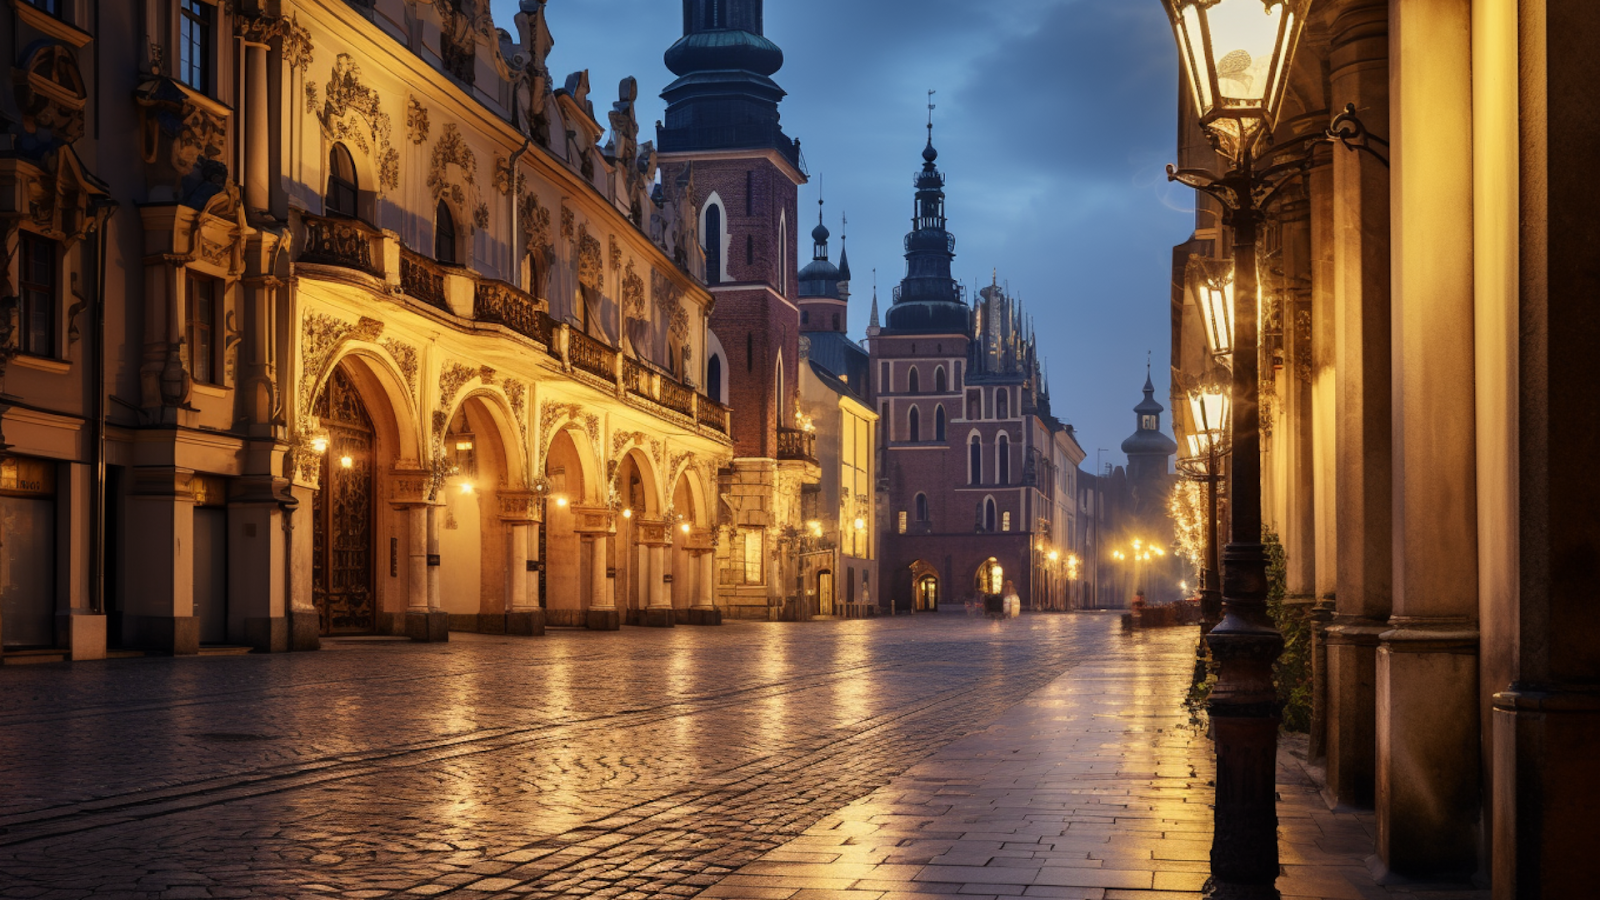 Twilight settles over the historic cityscape of Kazimierz Dolny, Poland, highlighting the architectural splendor that makes this one of Europe's top destinations.